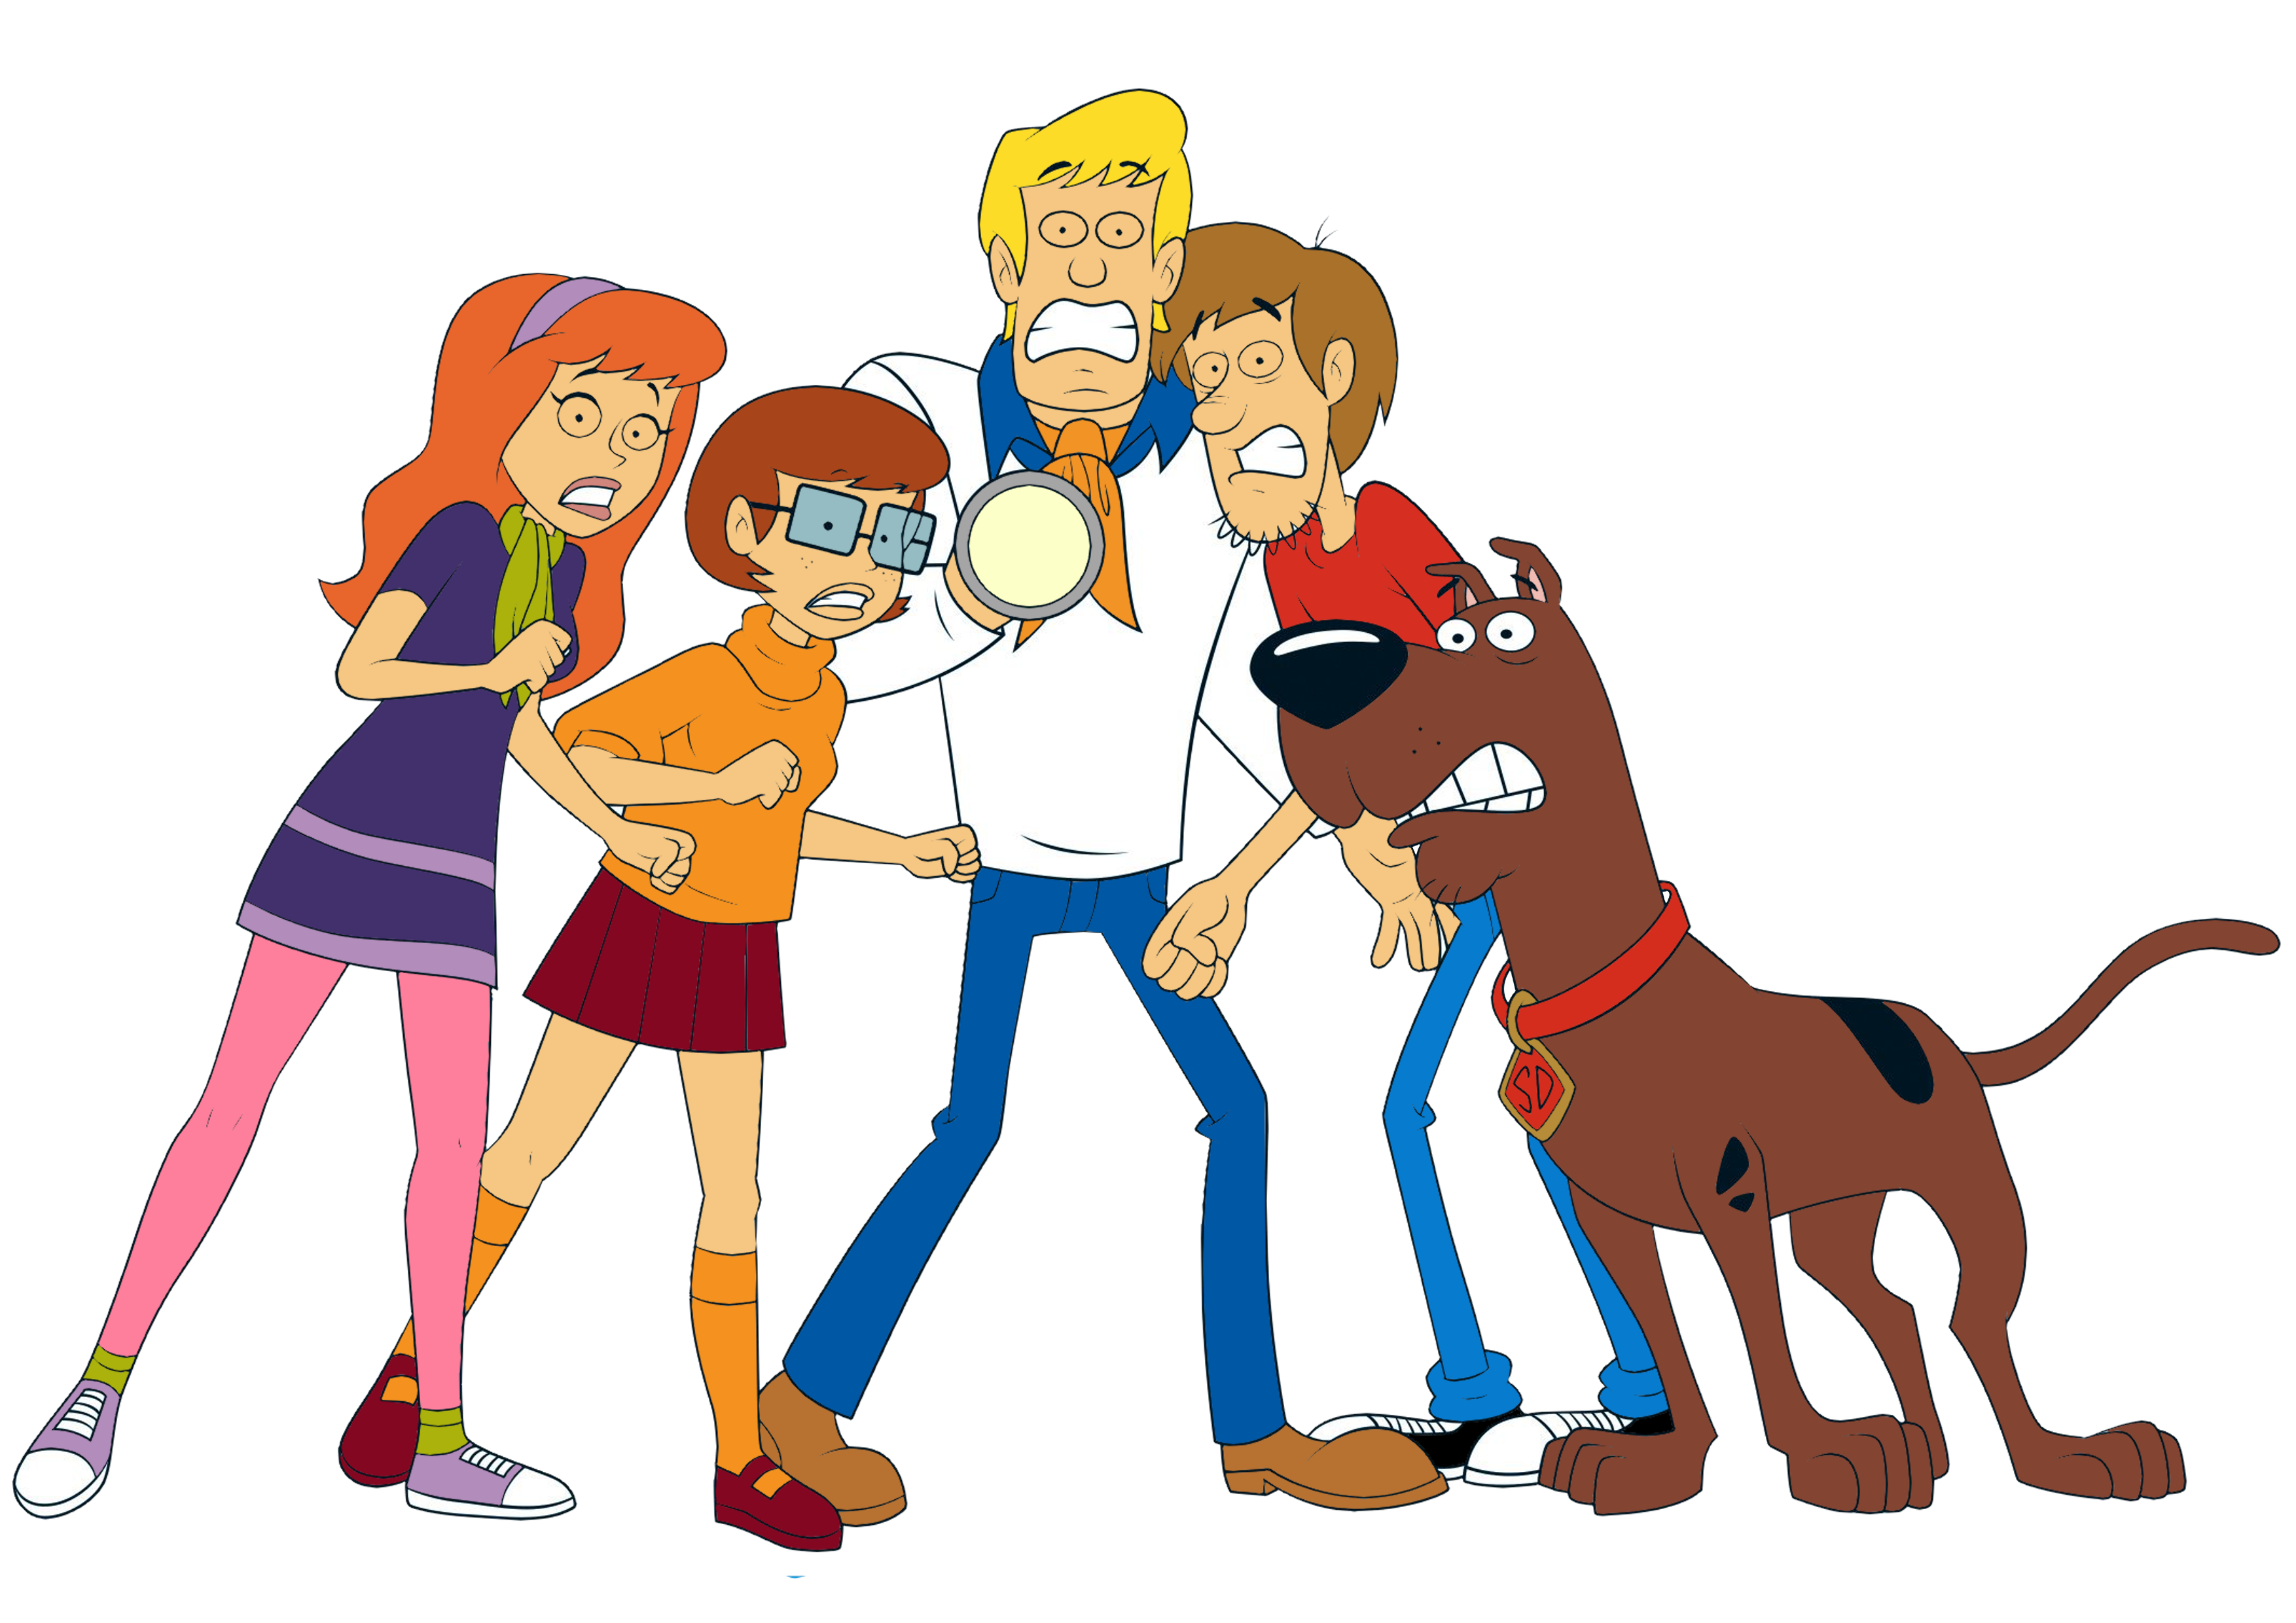 Cyber Gang Scared Be Cool Scooby Doo By Jjmunden On Deviantart 